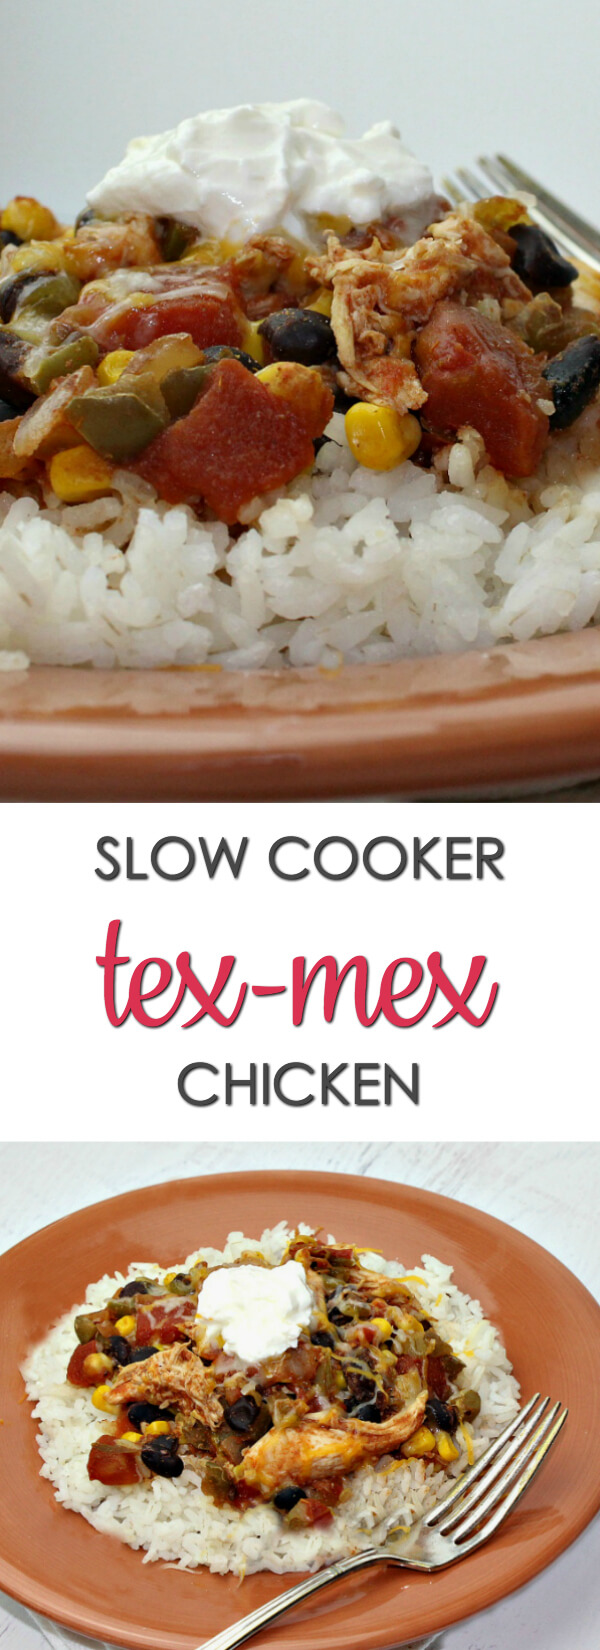 Close up and Wide Picture of Slower Cooker Tex Mex Chicken with White Rice and Sour Cream on a Orange Plate with a Metal Fork. 